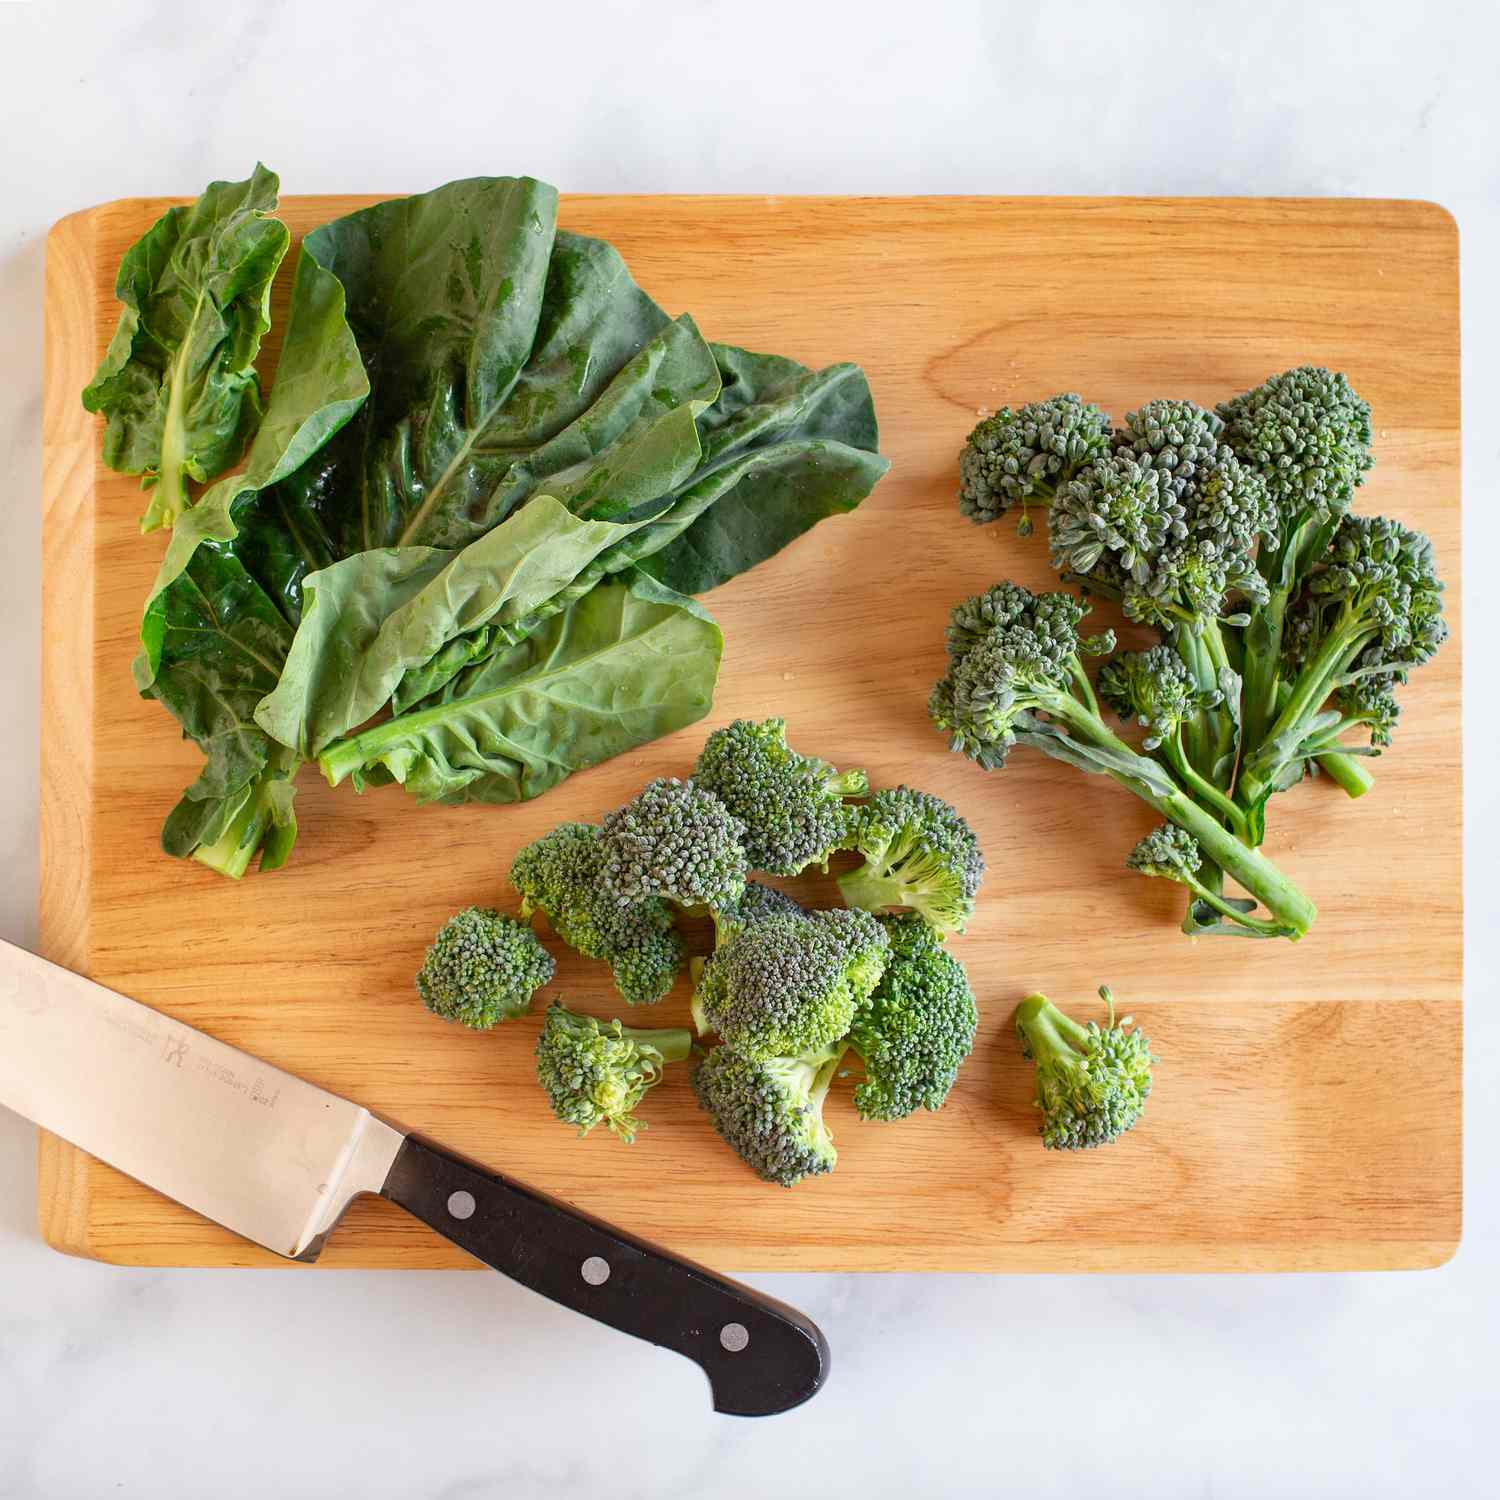 3 different. types of cut broccoli on a wood cutting board with a knife